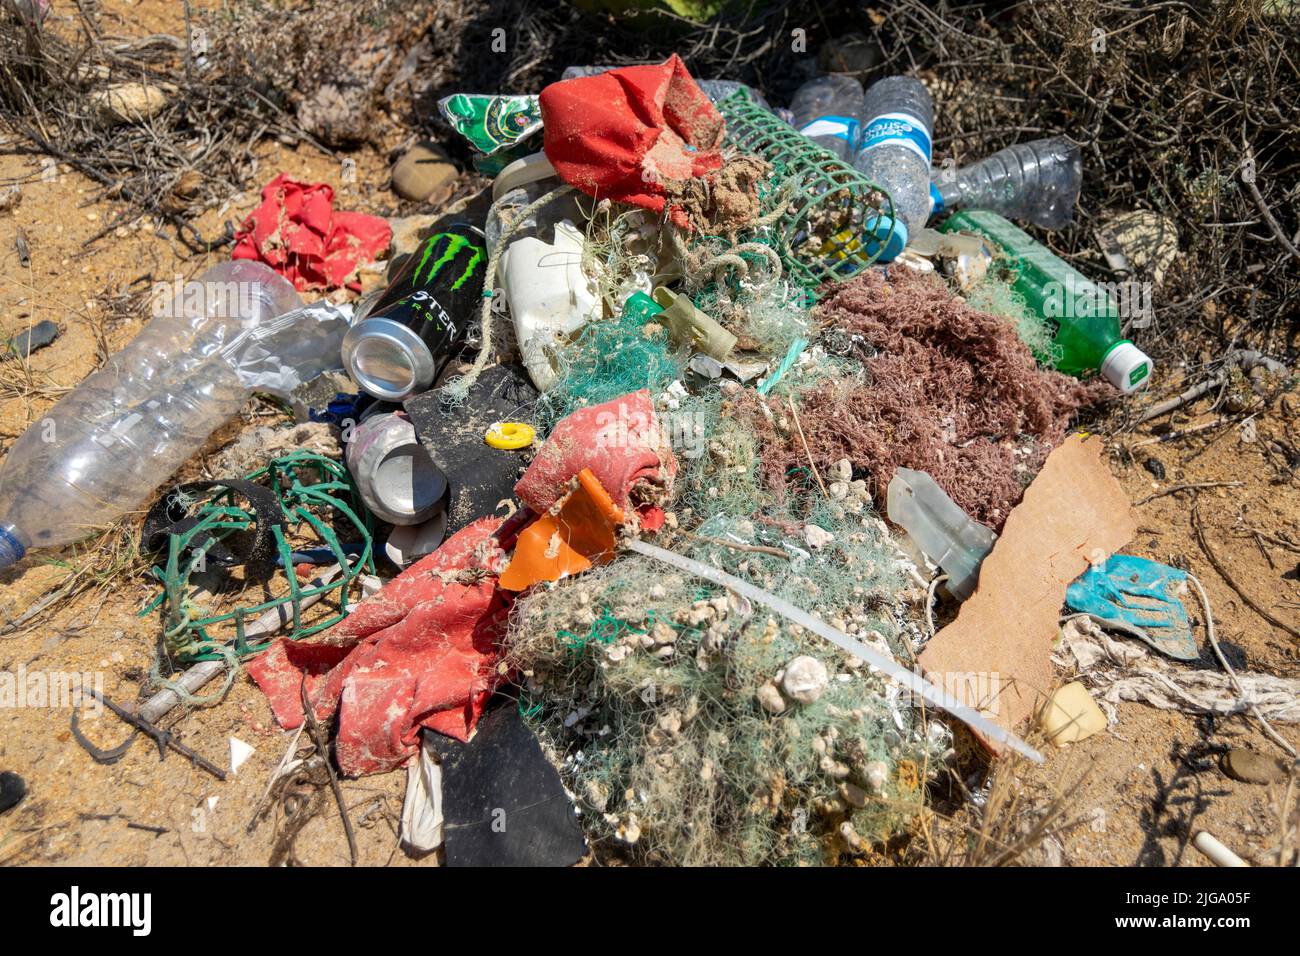 Ocean pollution collected on beaches, pollution due to plastics, old nets, bottles and ropes. Saving the ocean from pollution. Collecting garbage. Stock Photo